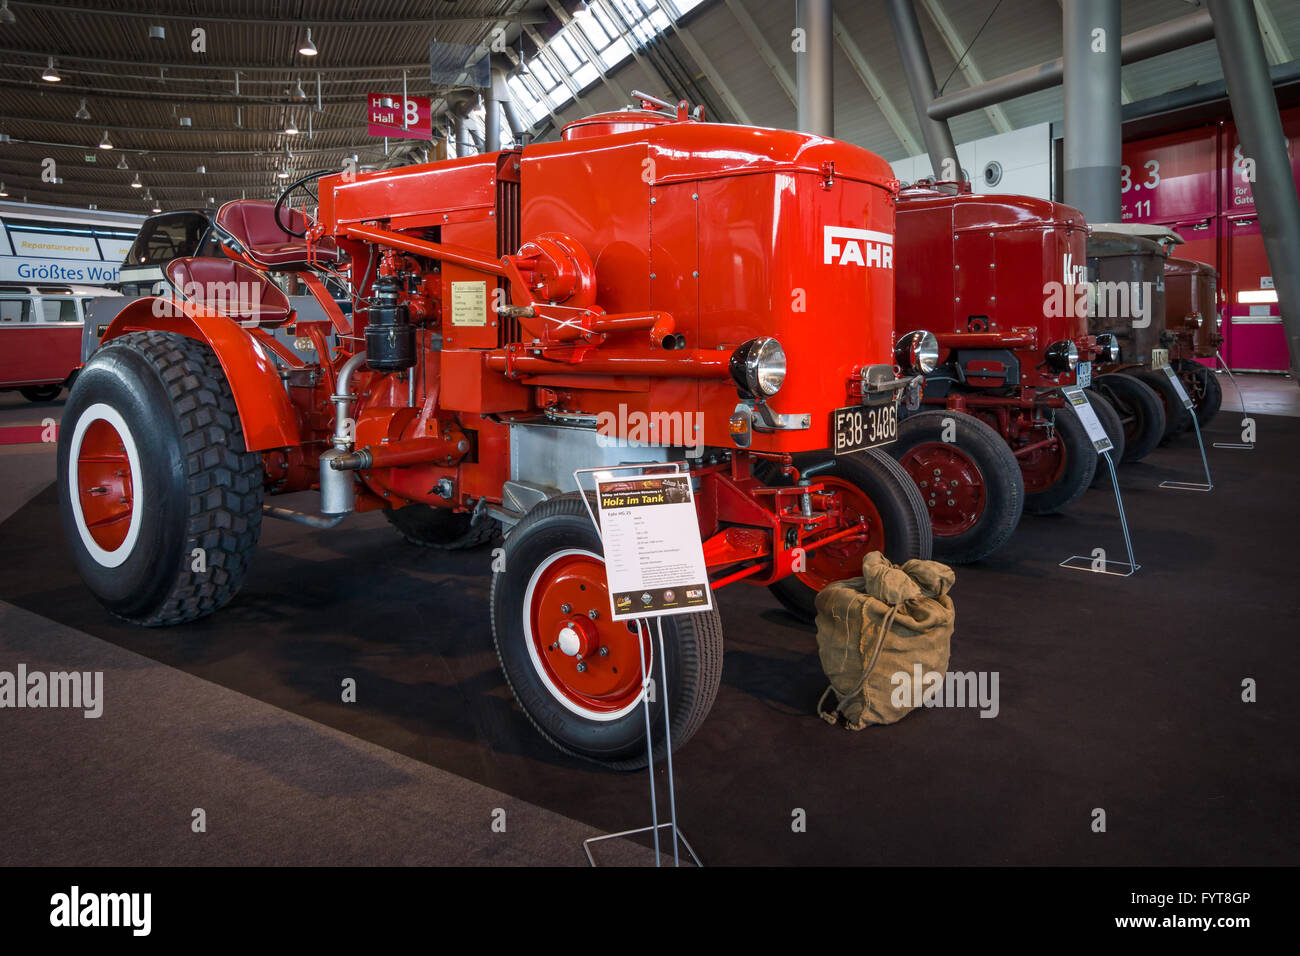 The tractor Fahr HG25 Holzgas (wood gas generator), 1943. Stock Photo